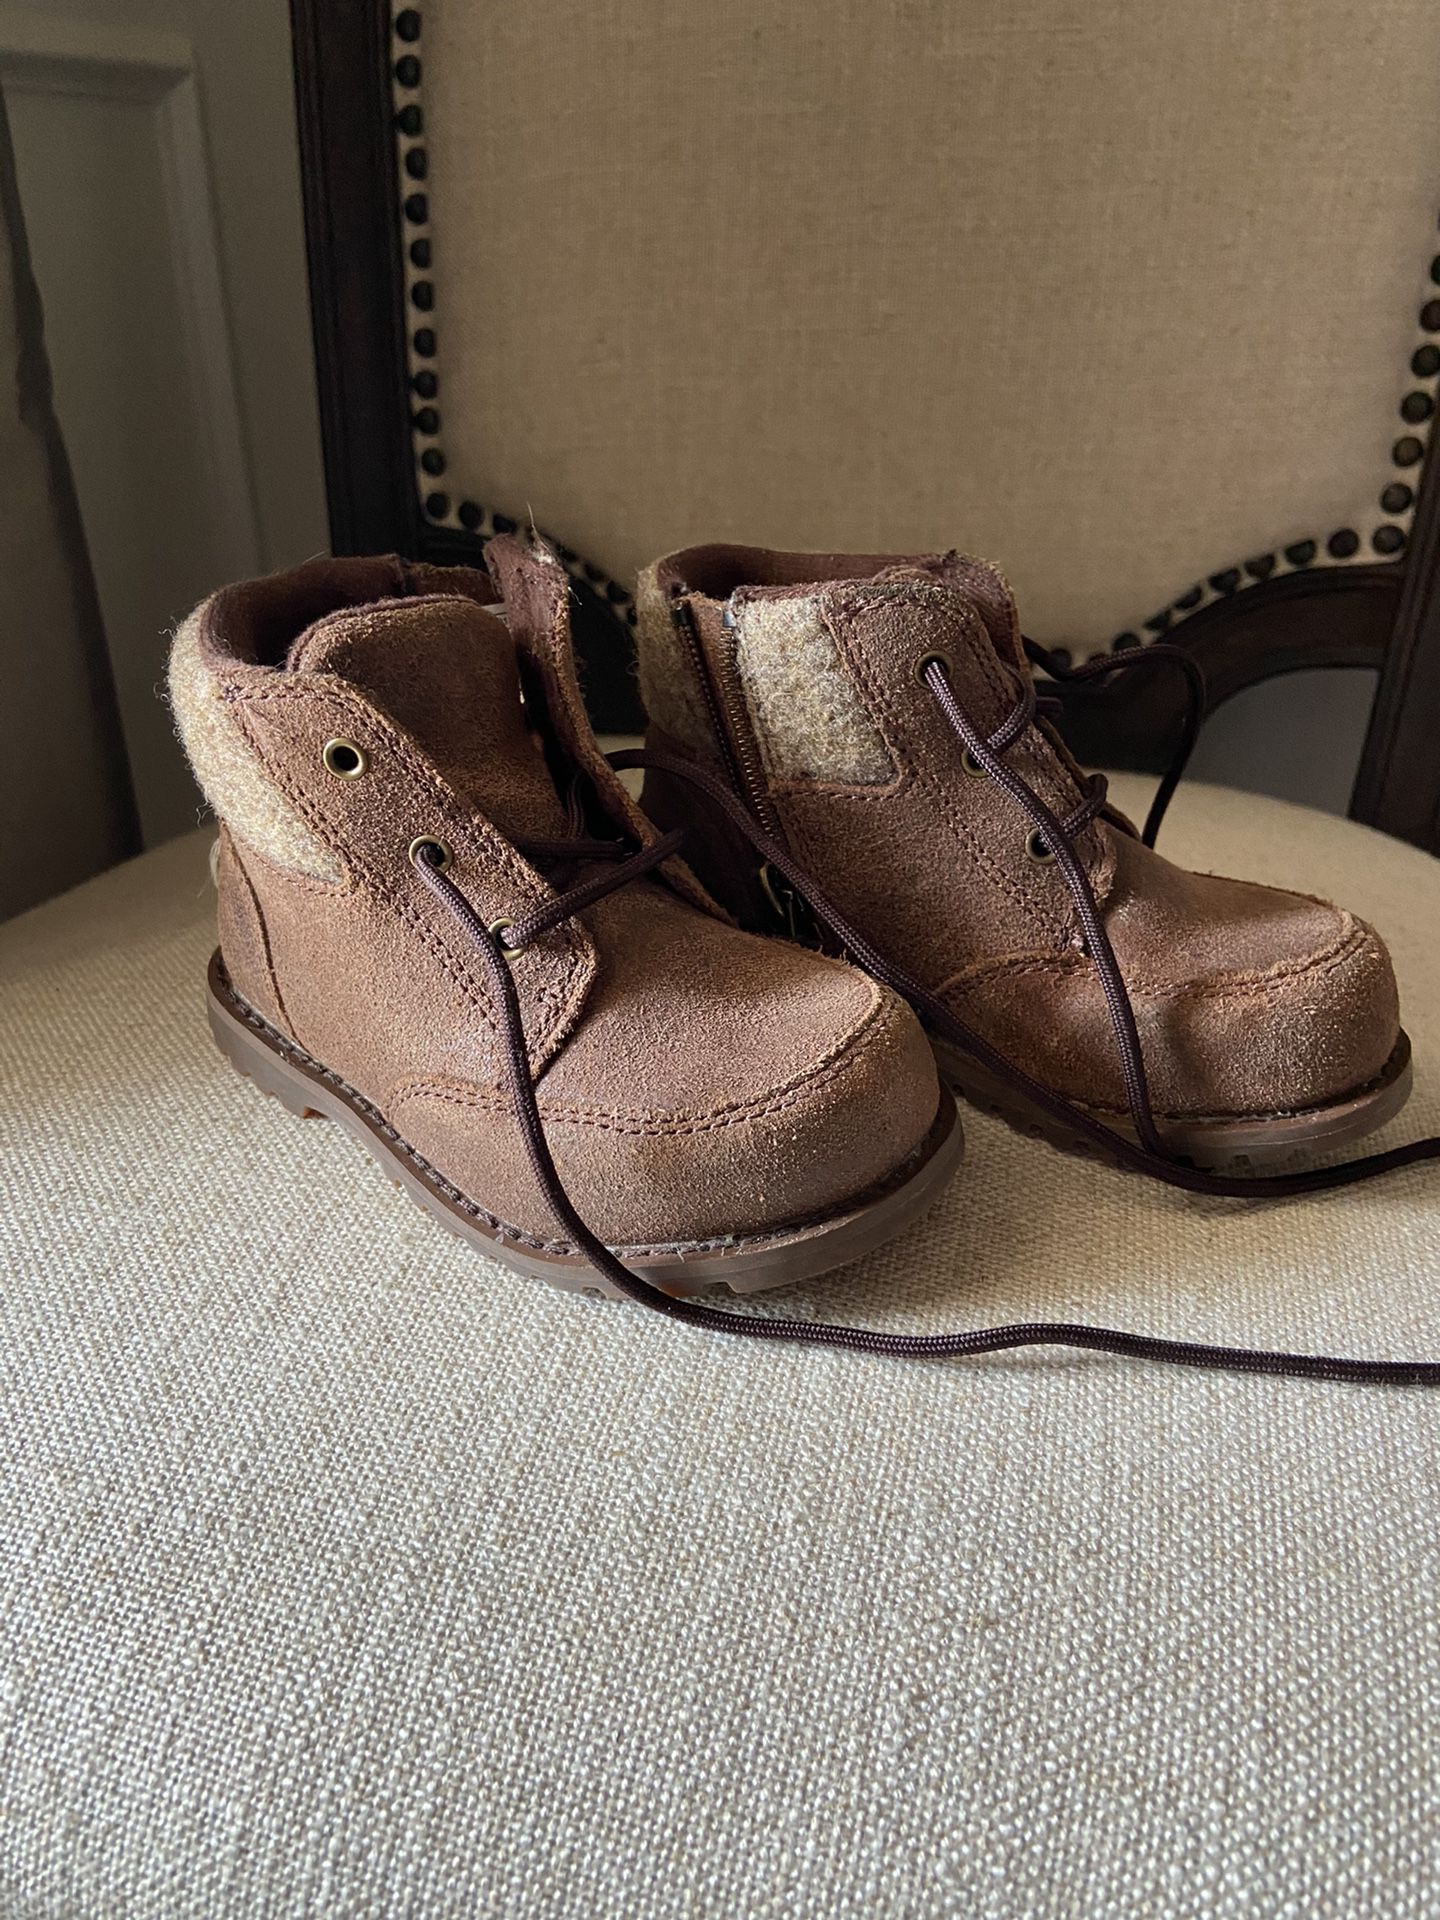 Toddler Size 7 UGG Boots